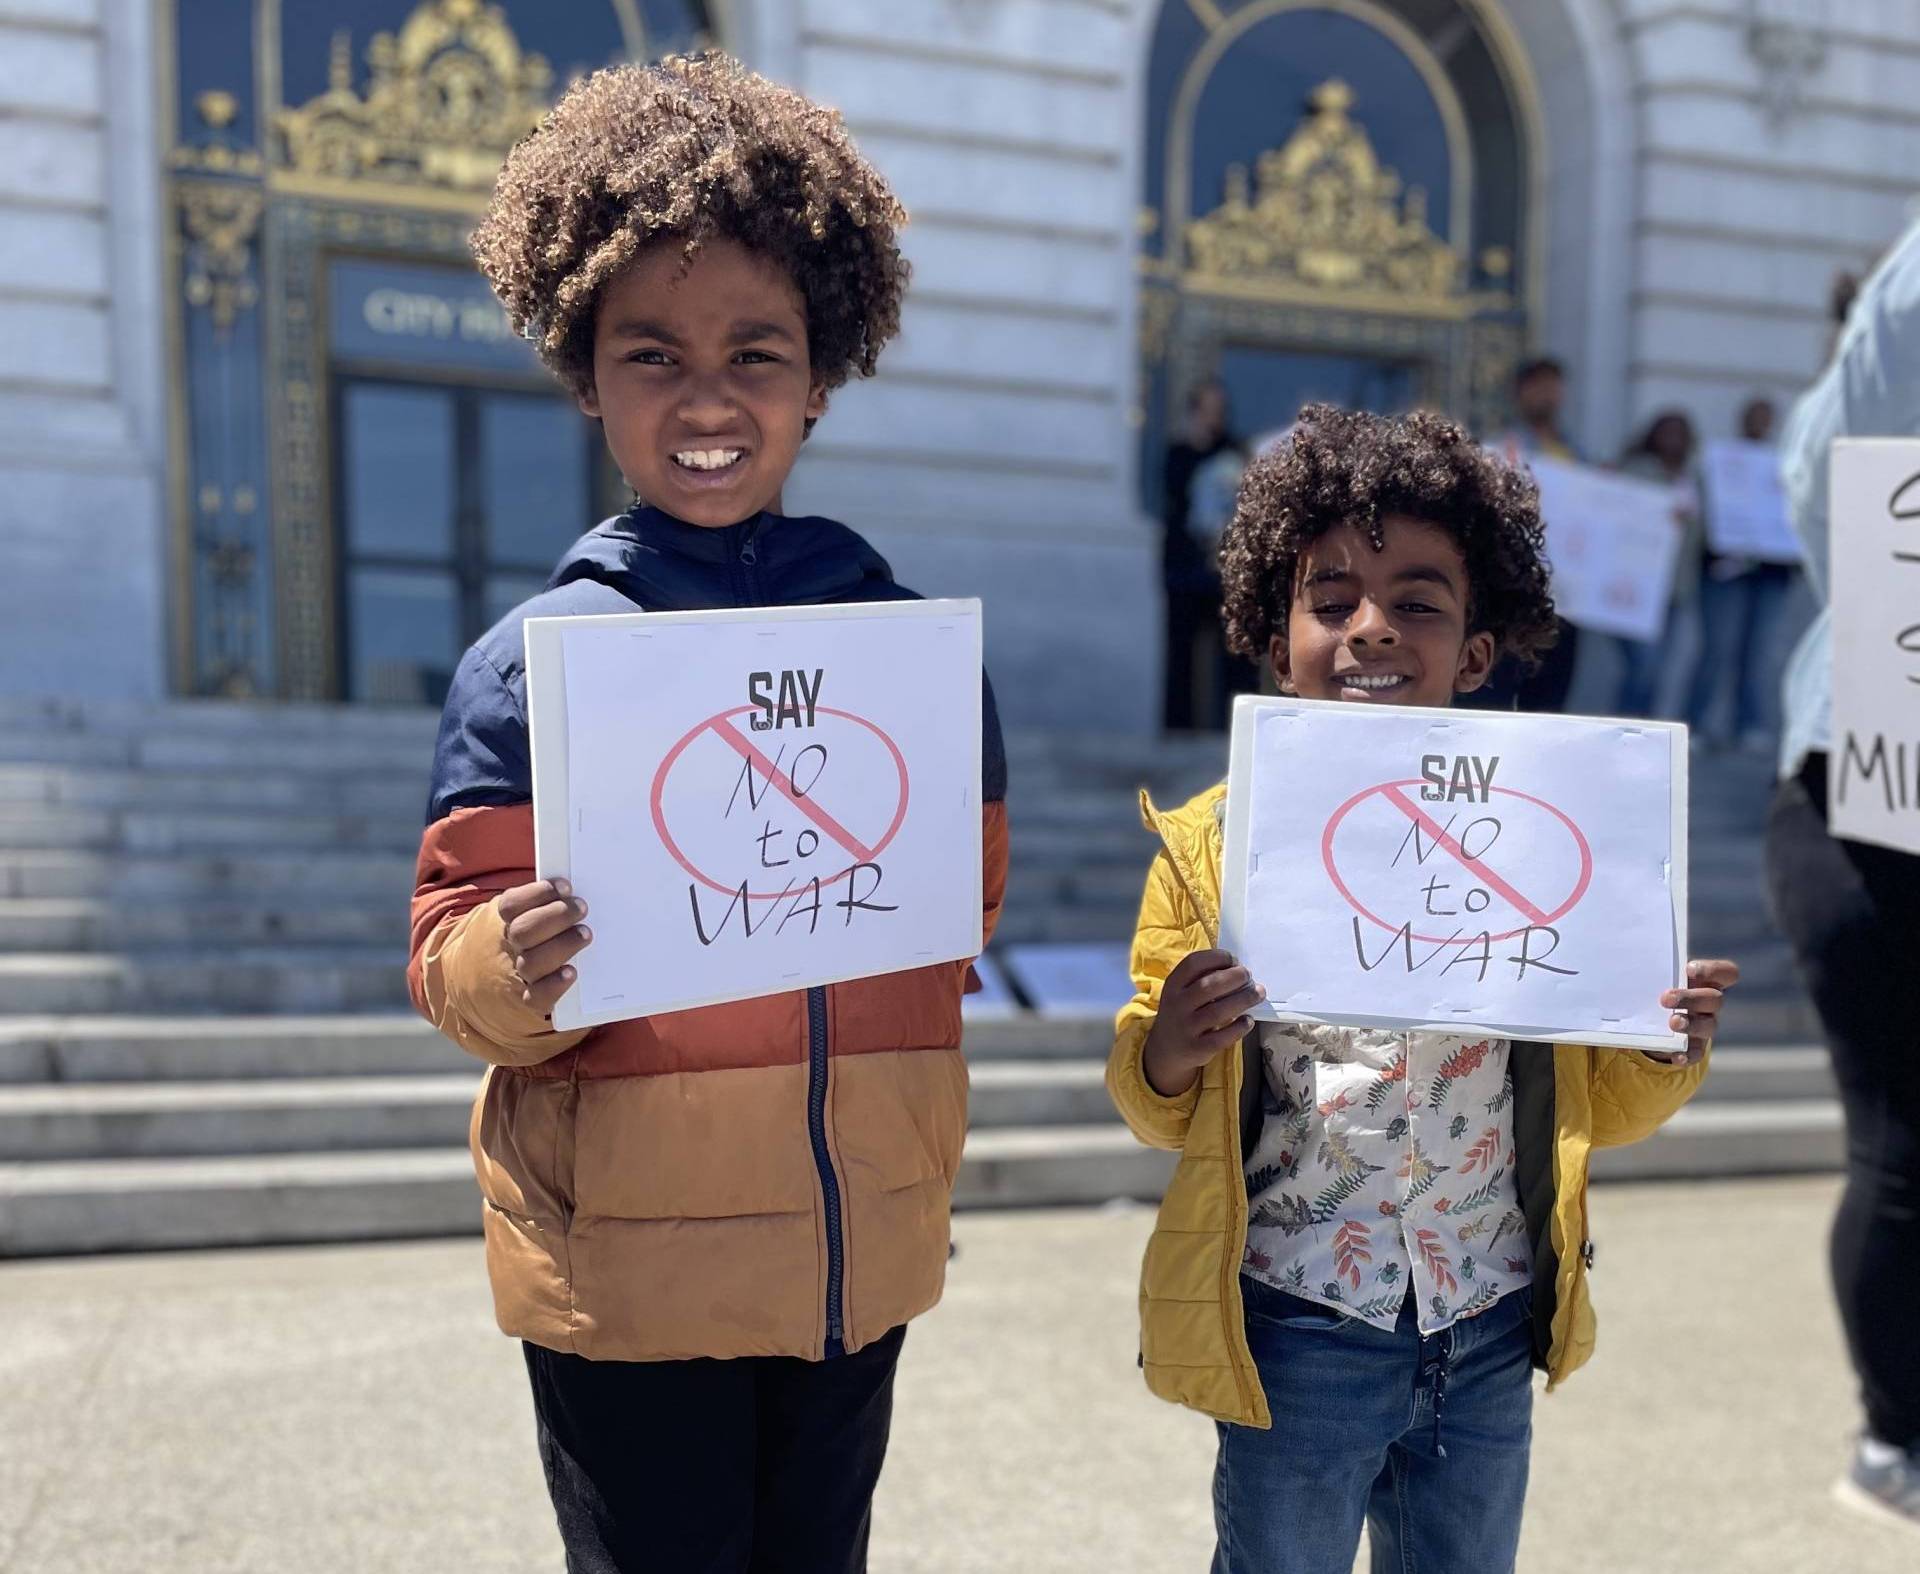 Two Sudanese American children, with long curly natural hair and colorful puffy jackets, hold signs outside SF City Hall.